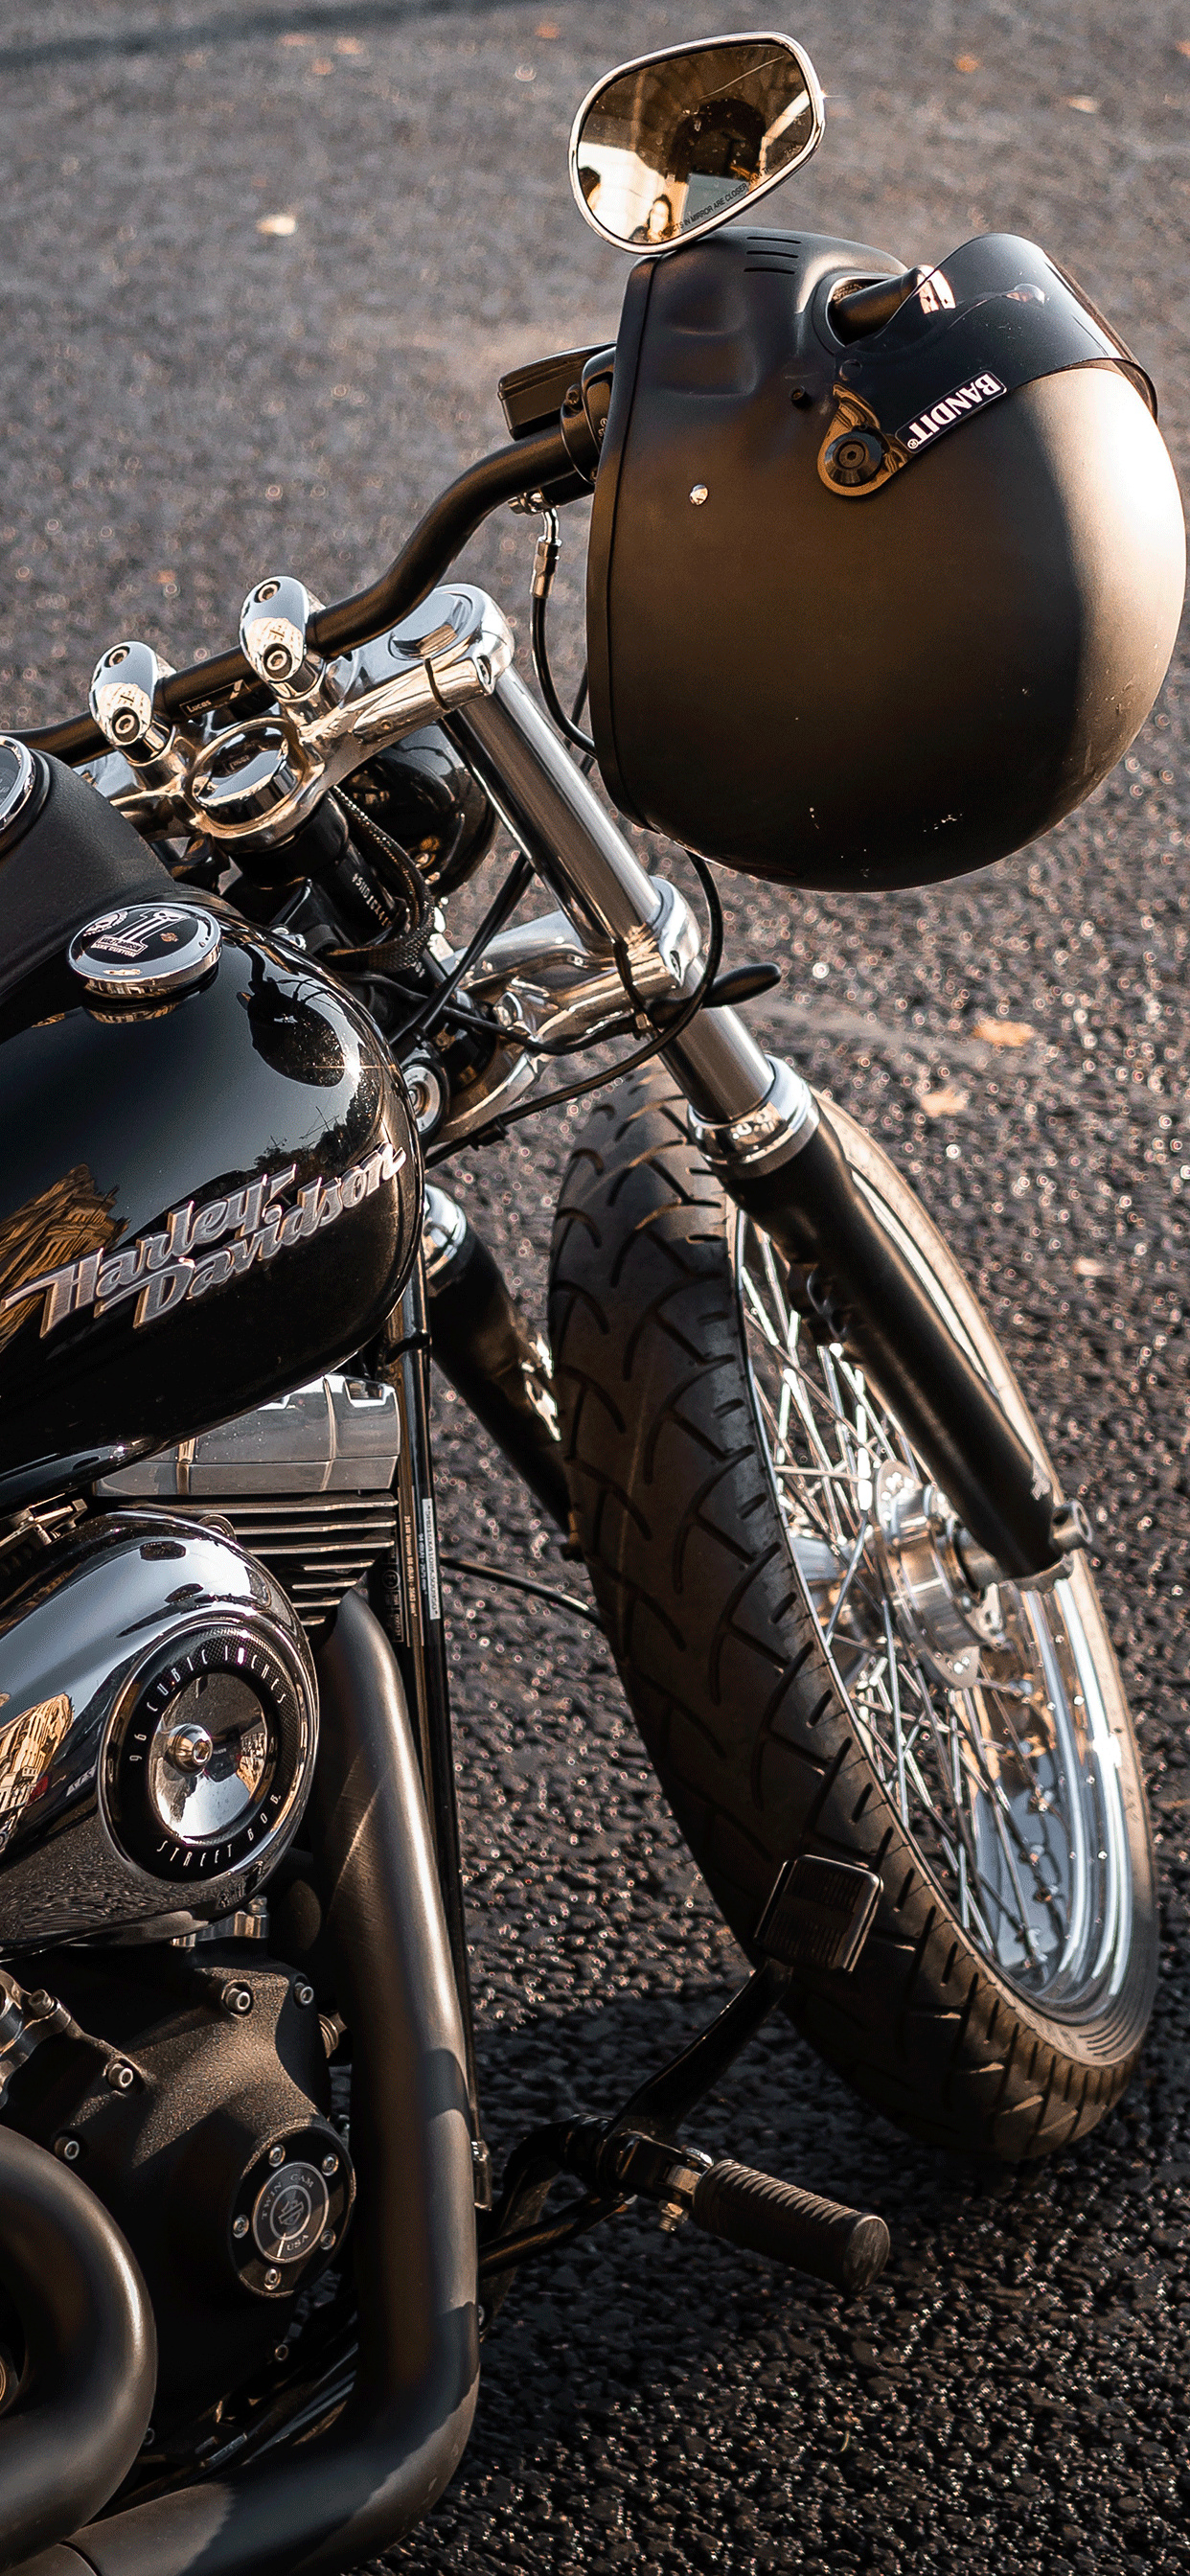 Harley-Davidson Iron 883, HD iPhone wallpapers, Captivating visuals, Motorcycle aesthetic, 1250x2690 HD Handy